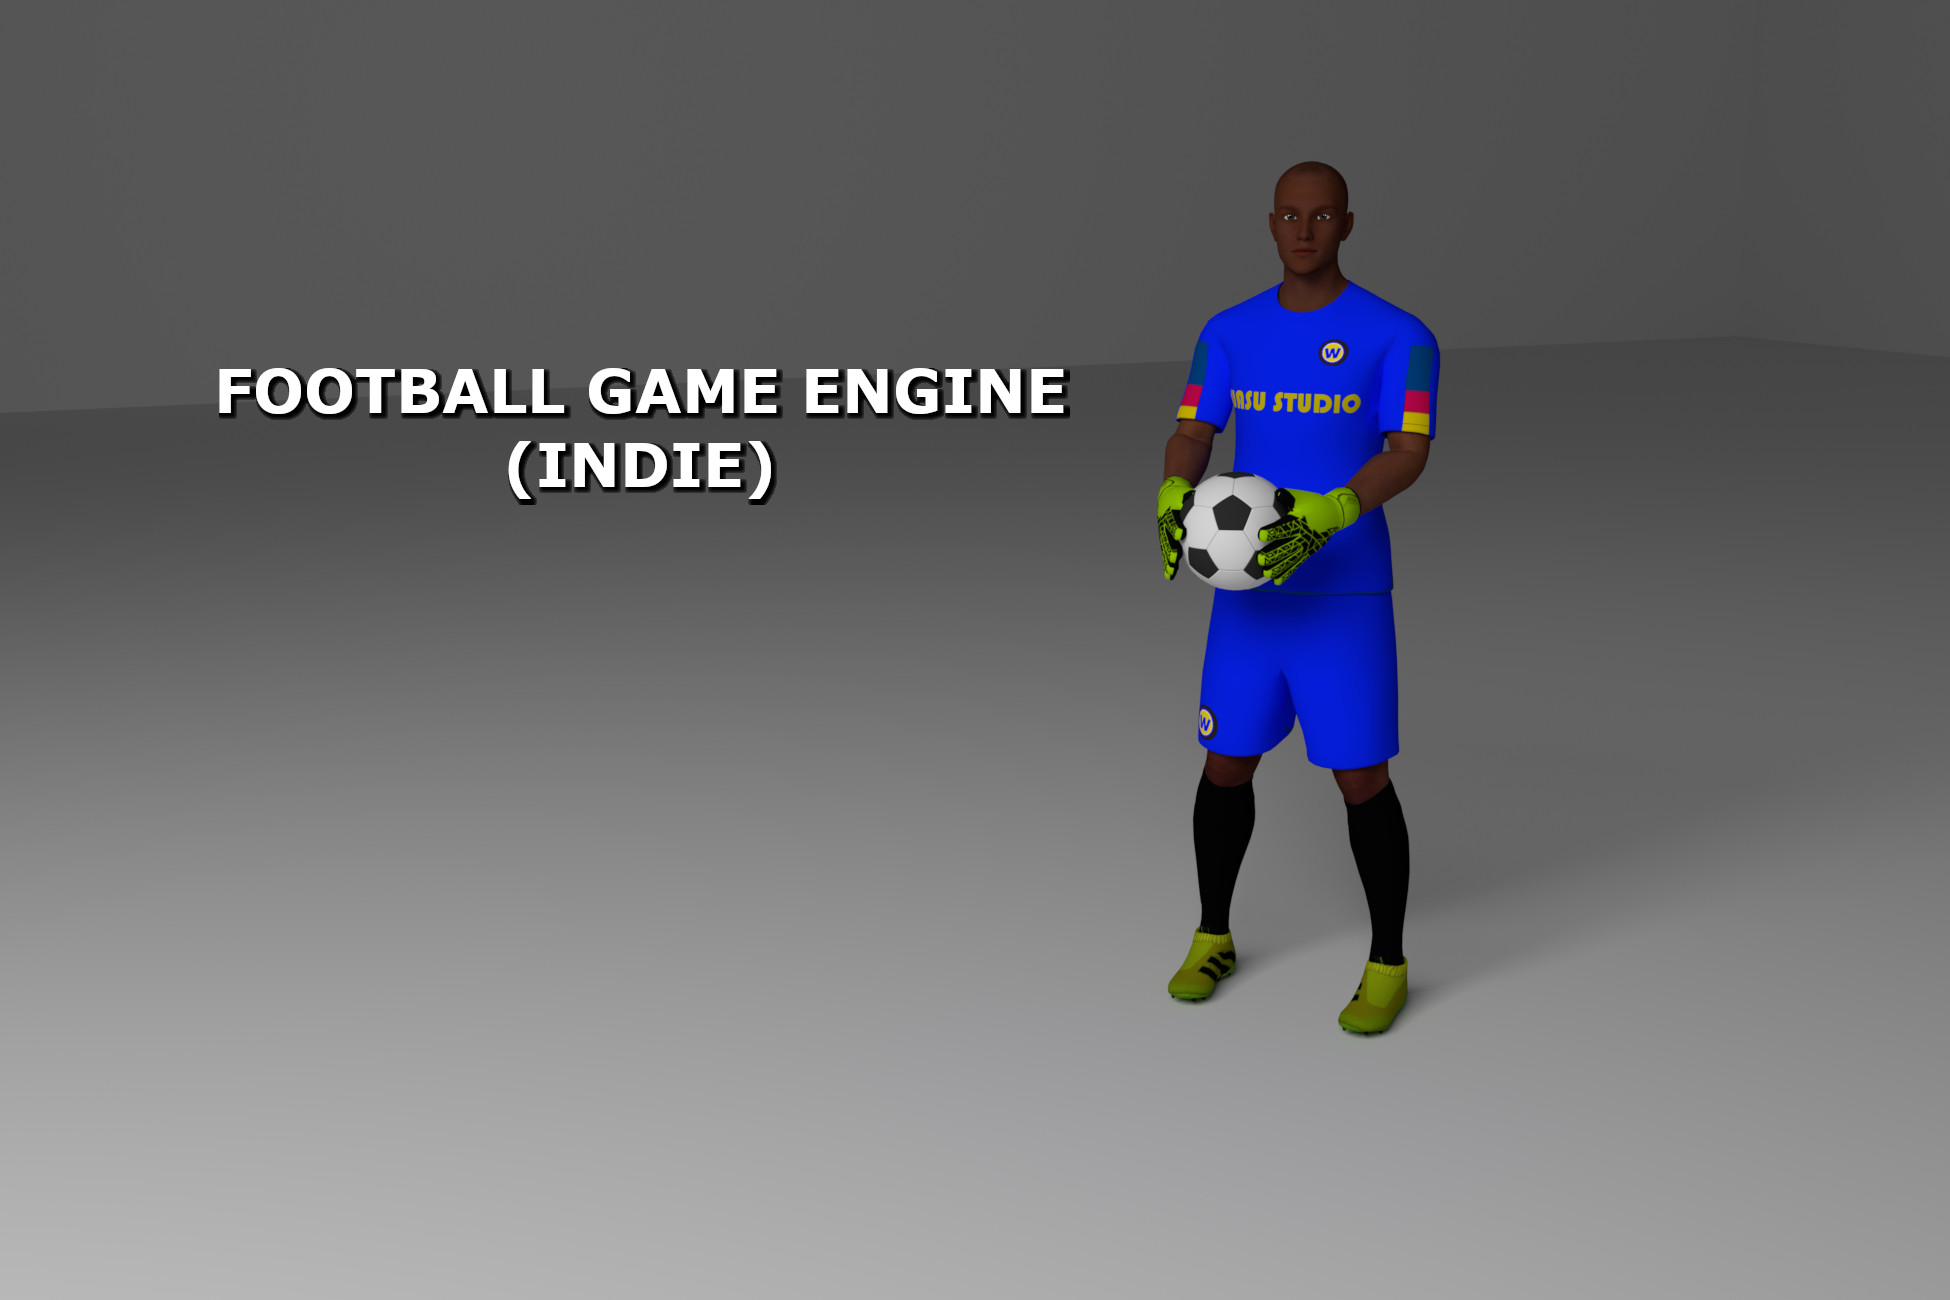 Football Game Engine (Indie) free download for the unity game engine